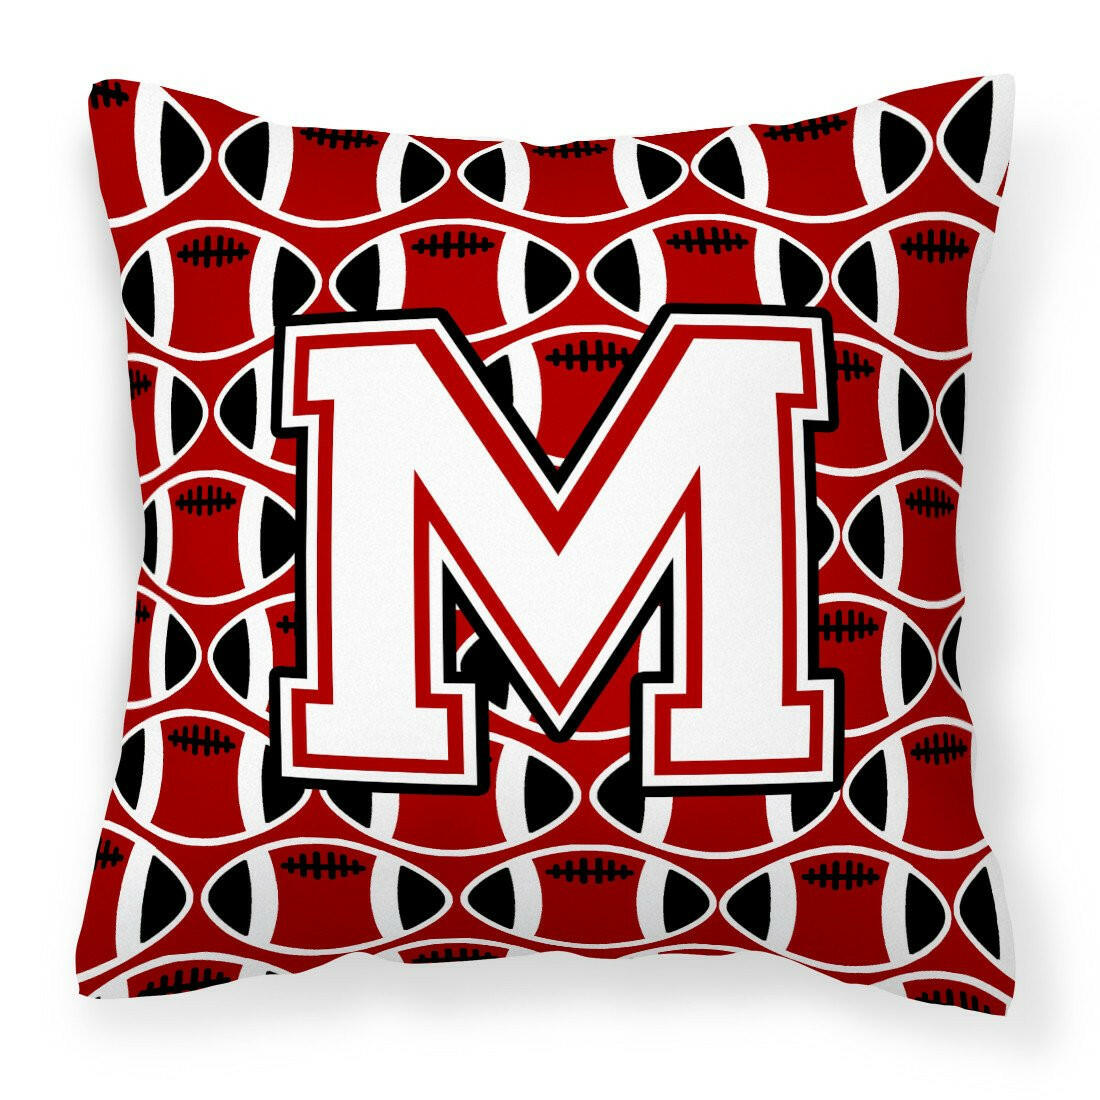 Letter M Football Cardinal and White Fabric Decorative Pillow CJ1082-MPW1414 by Caroline's Treasures